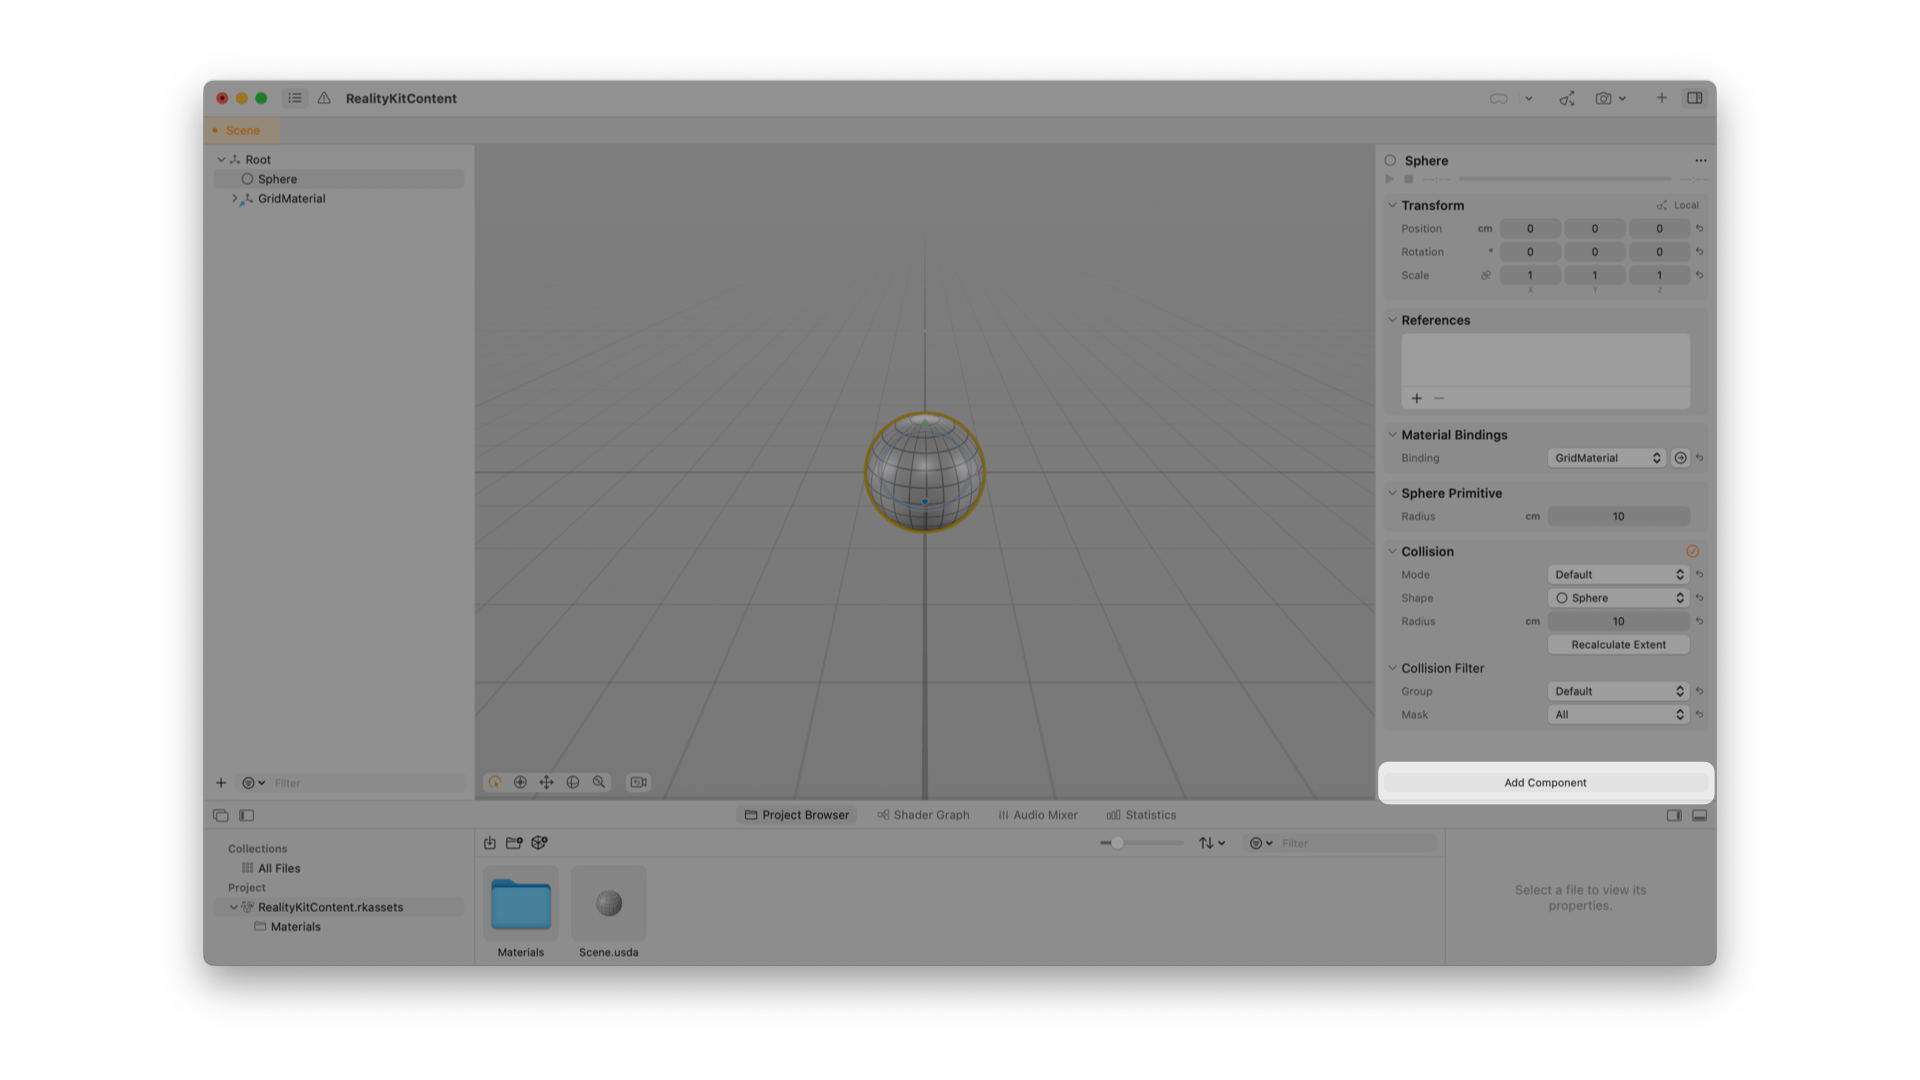 A screenshot of Reality Composer Pro showing the properties of a 3D sphere object. Various settings for the sphere are displayed along with an "Add Component" button at the bottom.